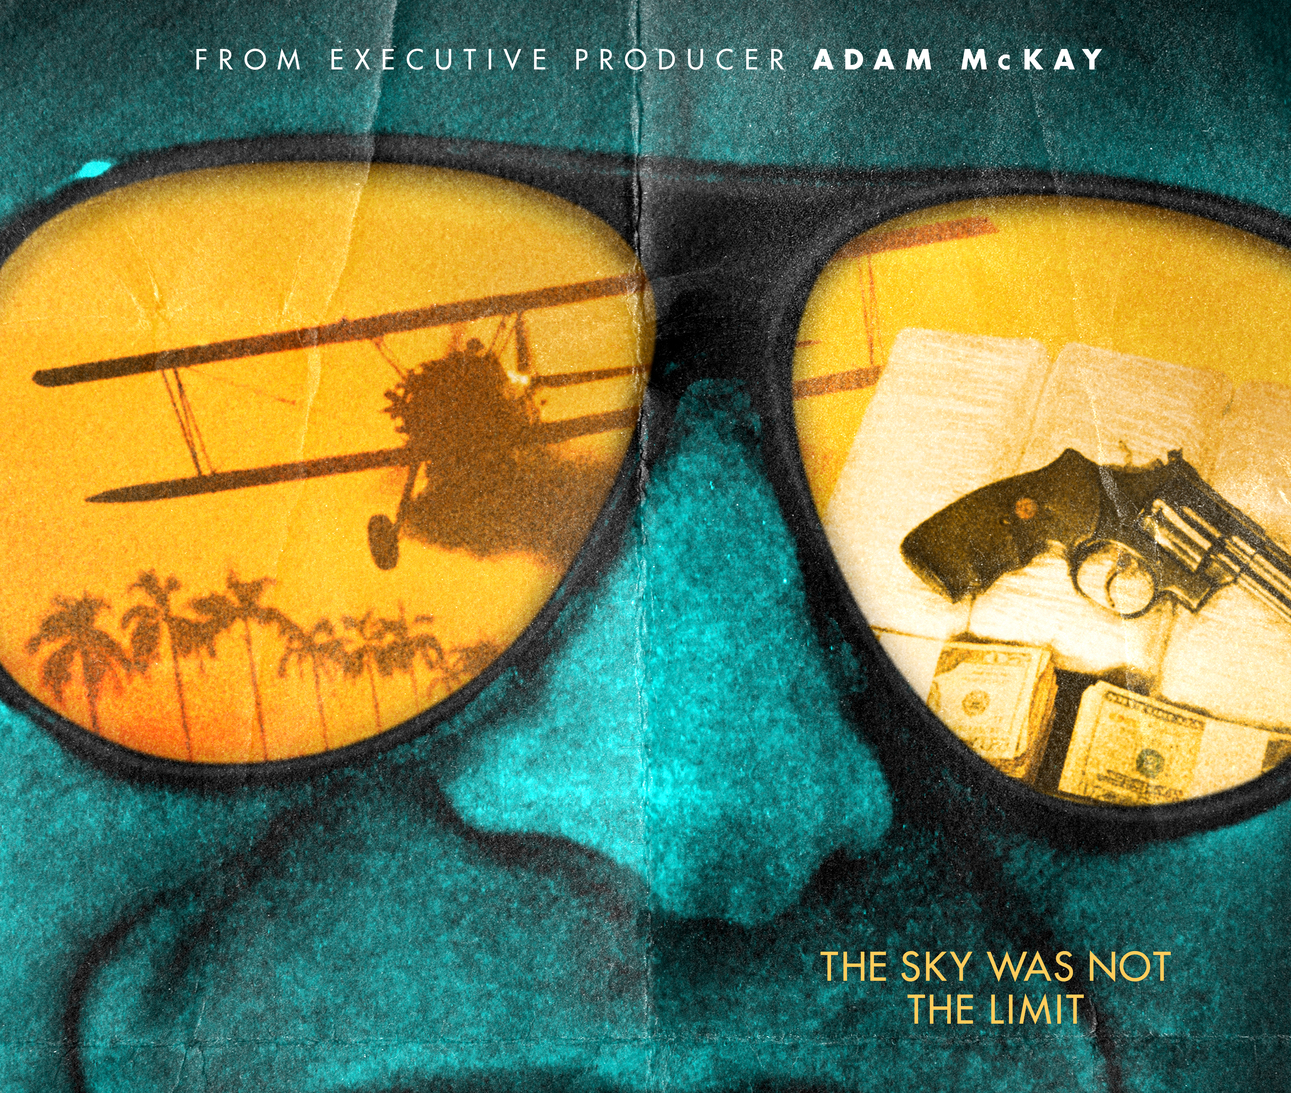 'The Invisible Pilot' poster features a man wearing sunglasses with the reflection of a plane in the sunglasses